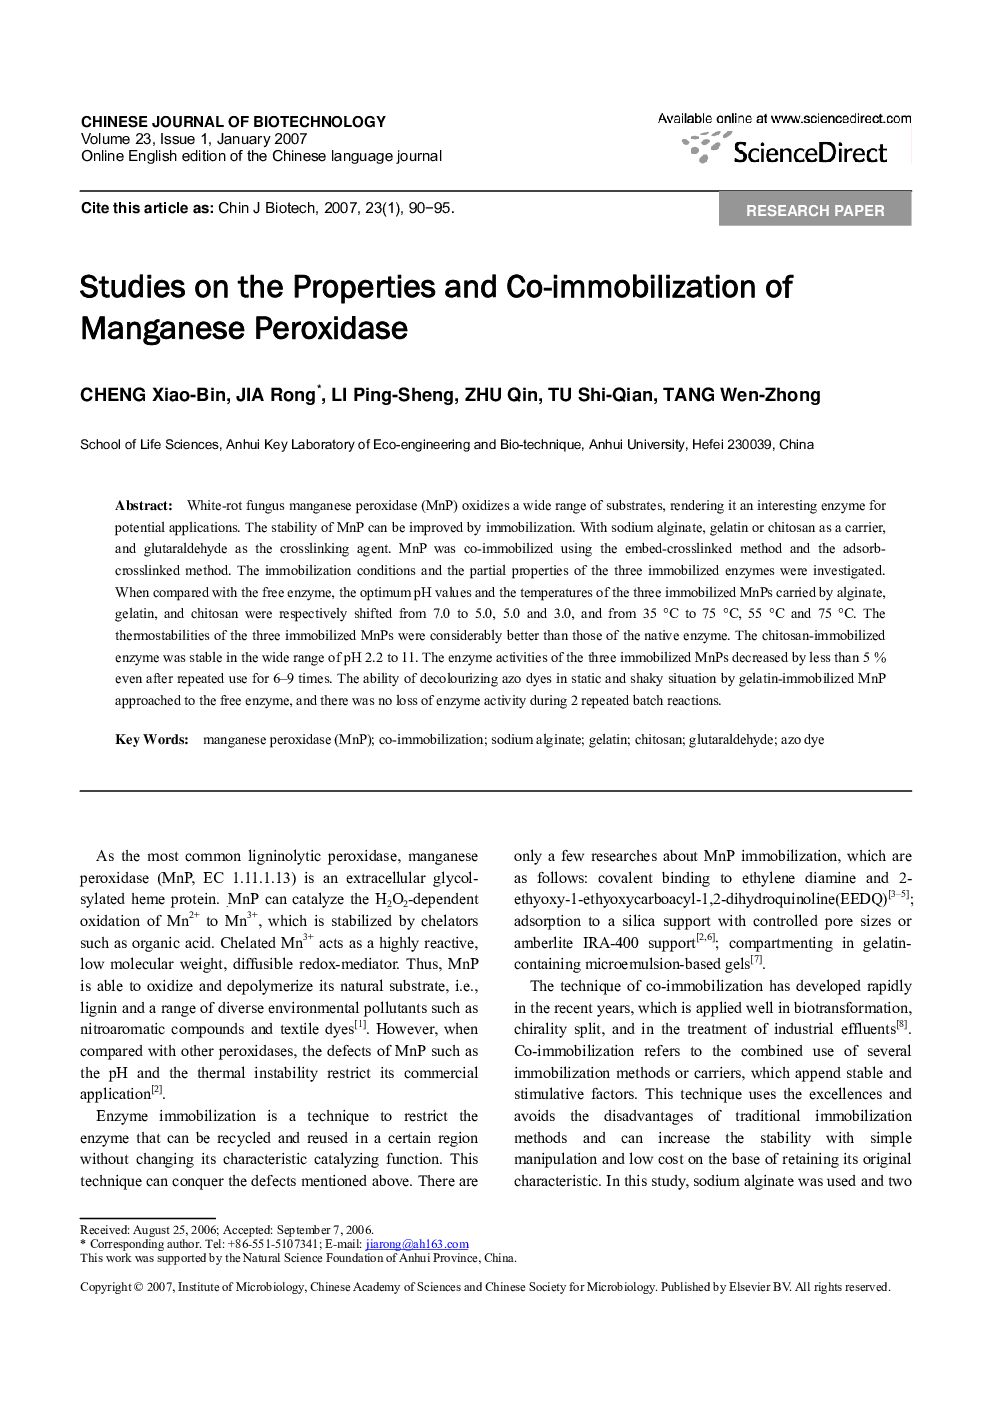 Studies on the Properties and Co-immobilization of Manganese Peroxidase